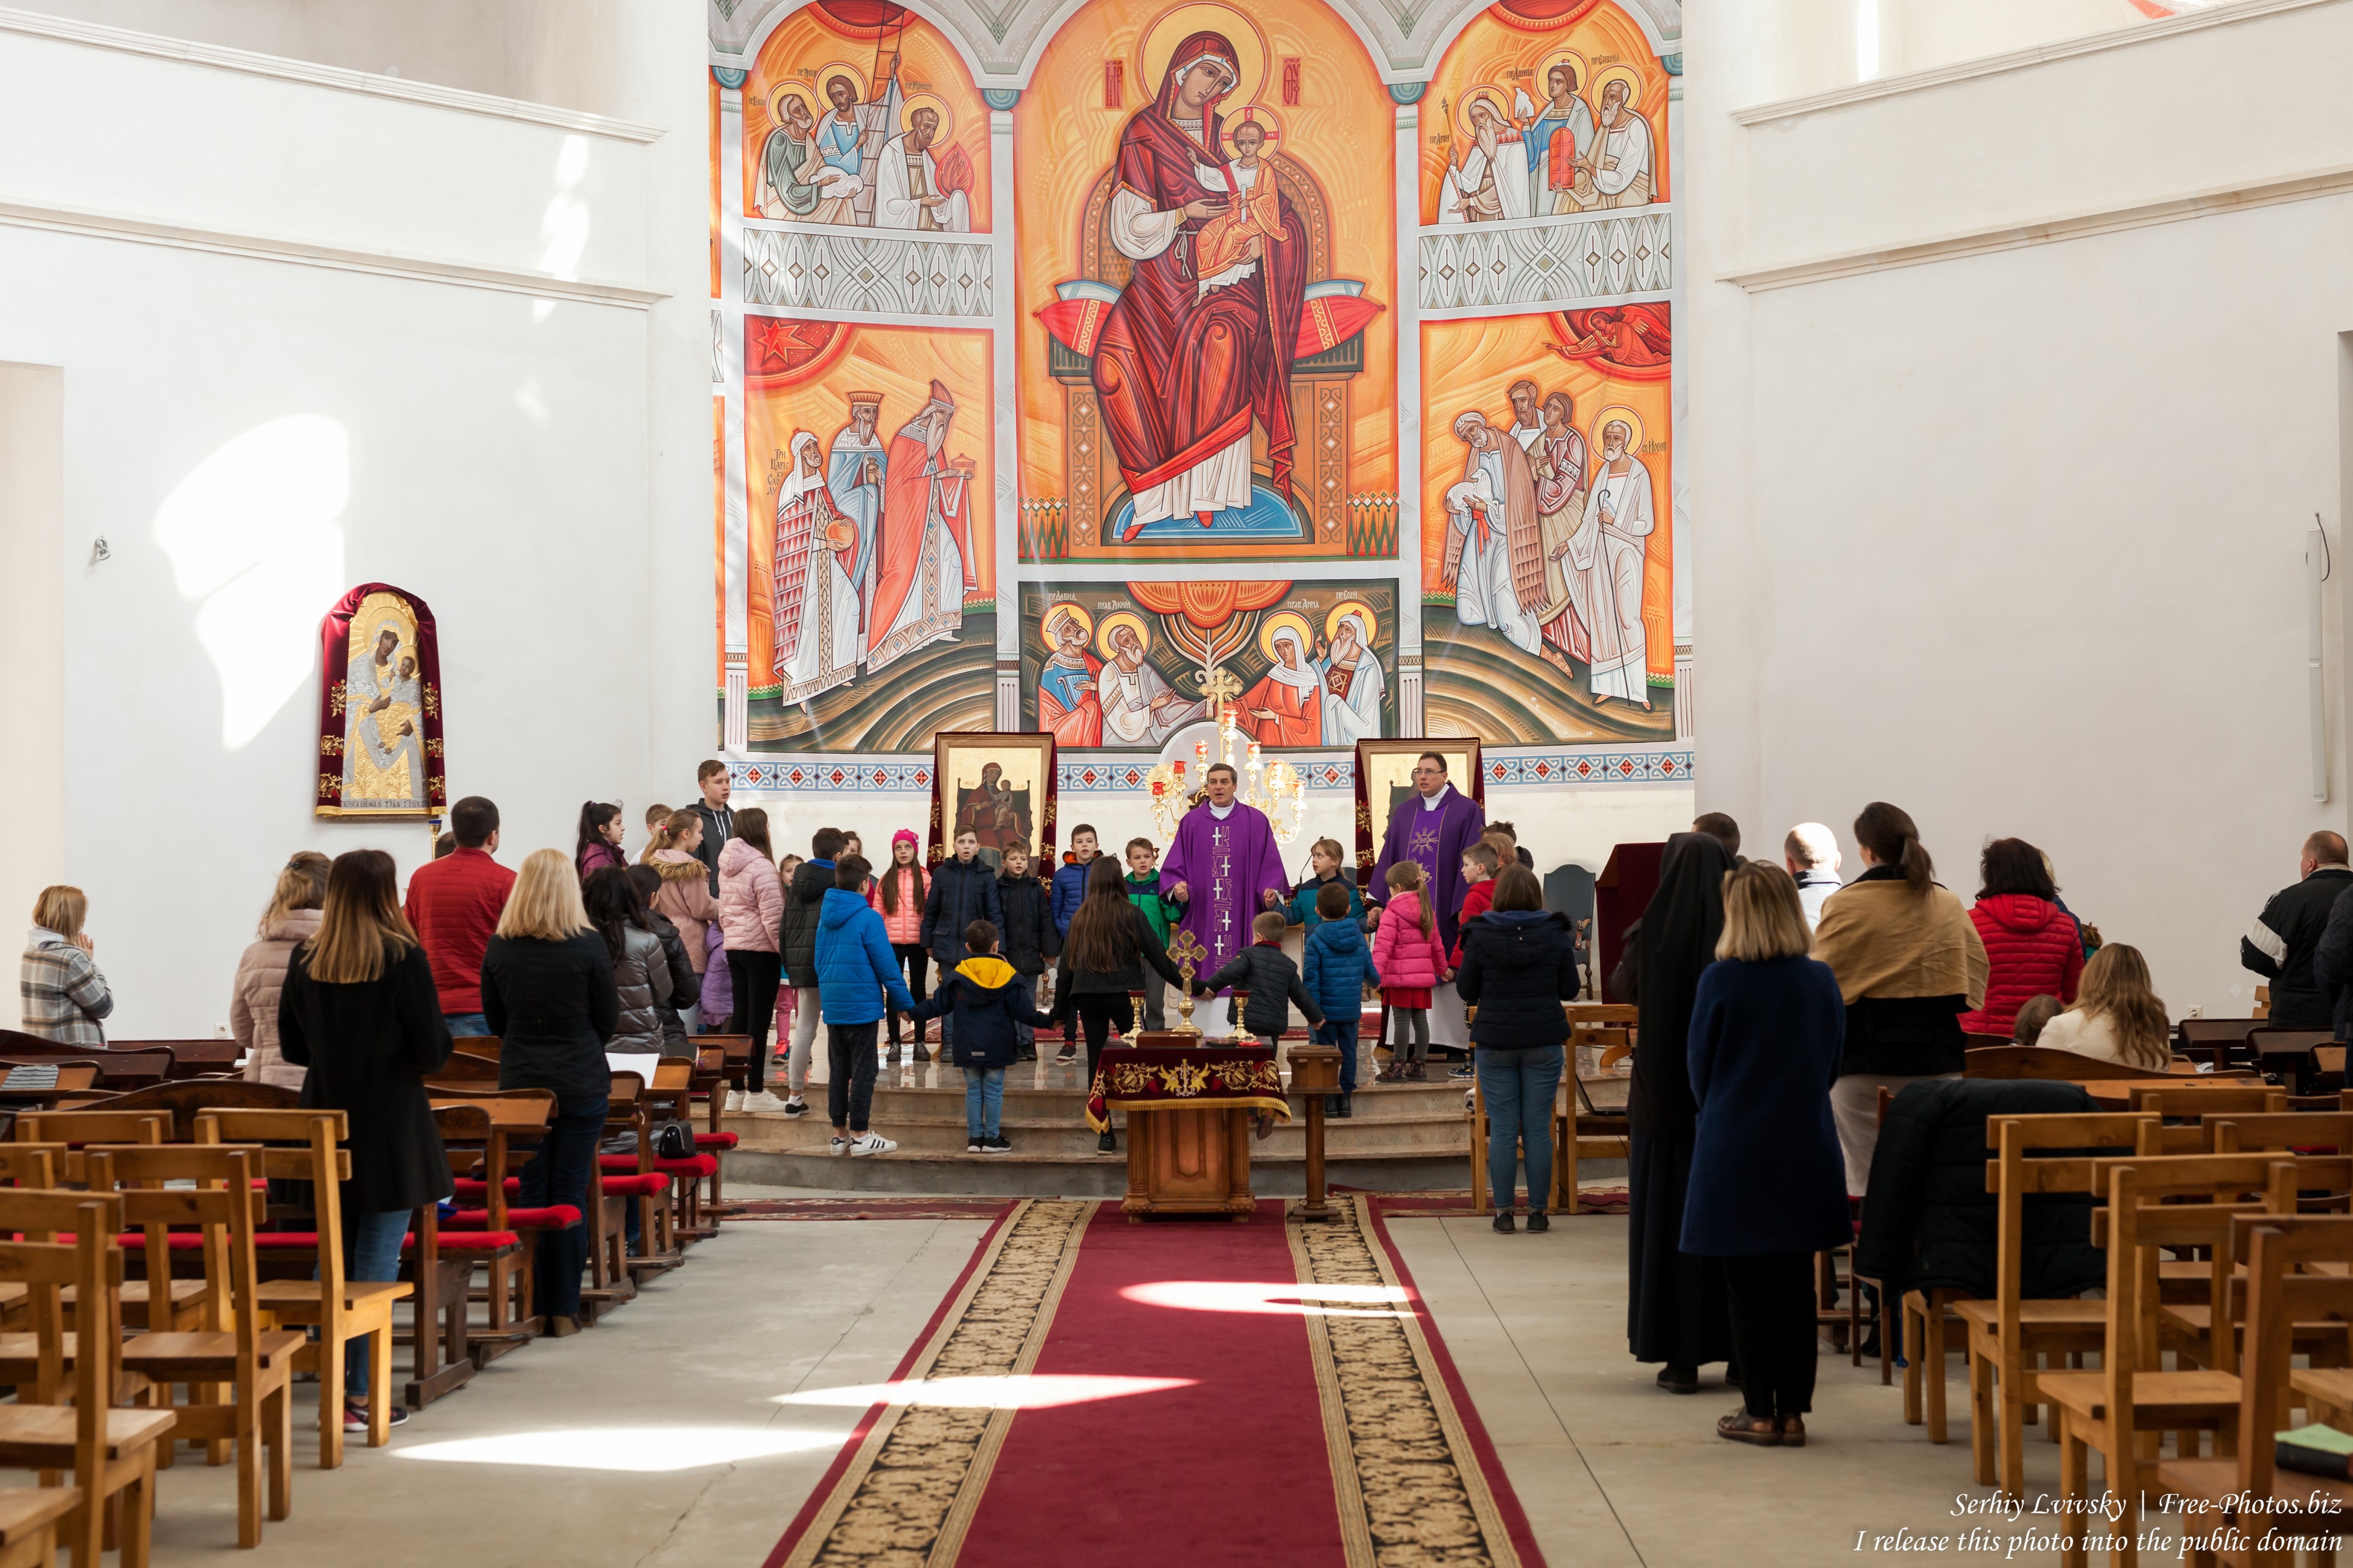 Photo Of People Praying In A Catholic Church In March 2019